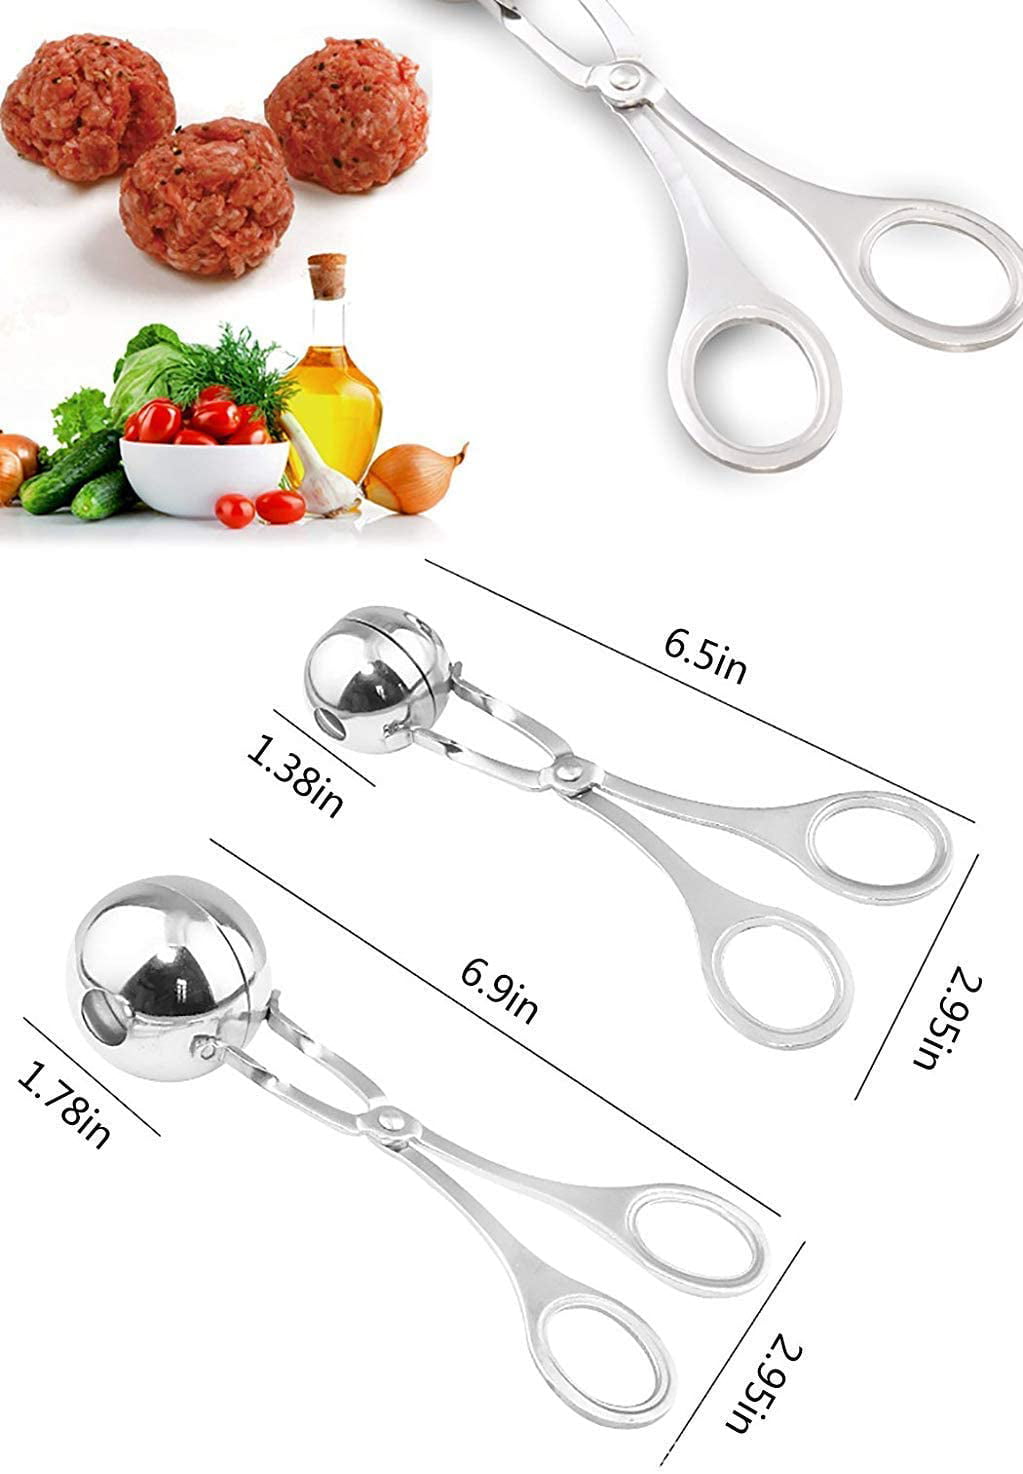 Meatball Maker, AHIER 2PCS None-stick Meatball Scoop Ball Maker 1.38&1.8,  Stainless Steel Meat Baller Cake Pop Scoop with Detachable Anti-Slip